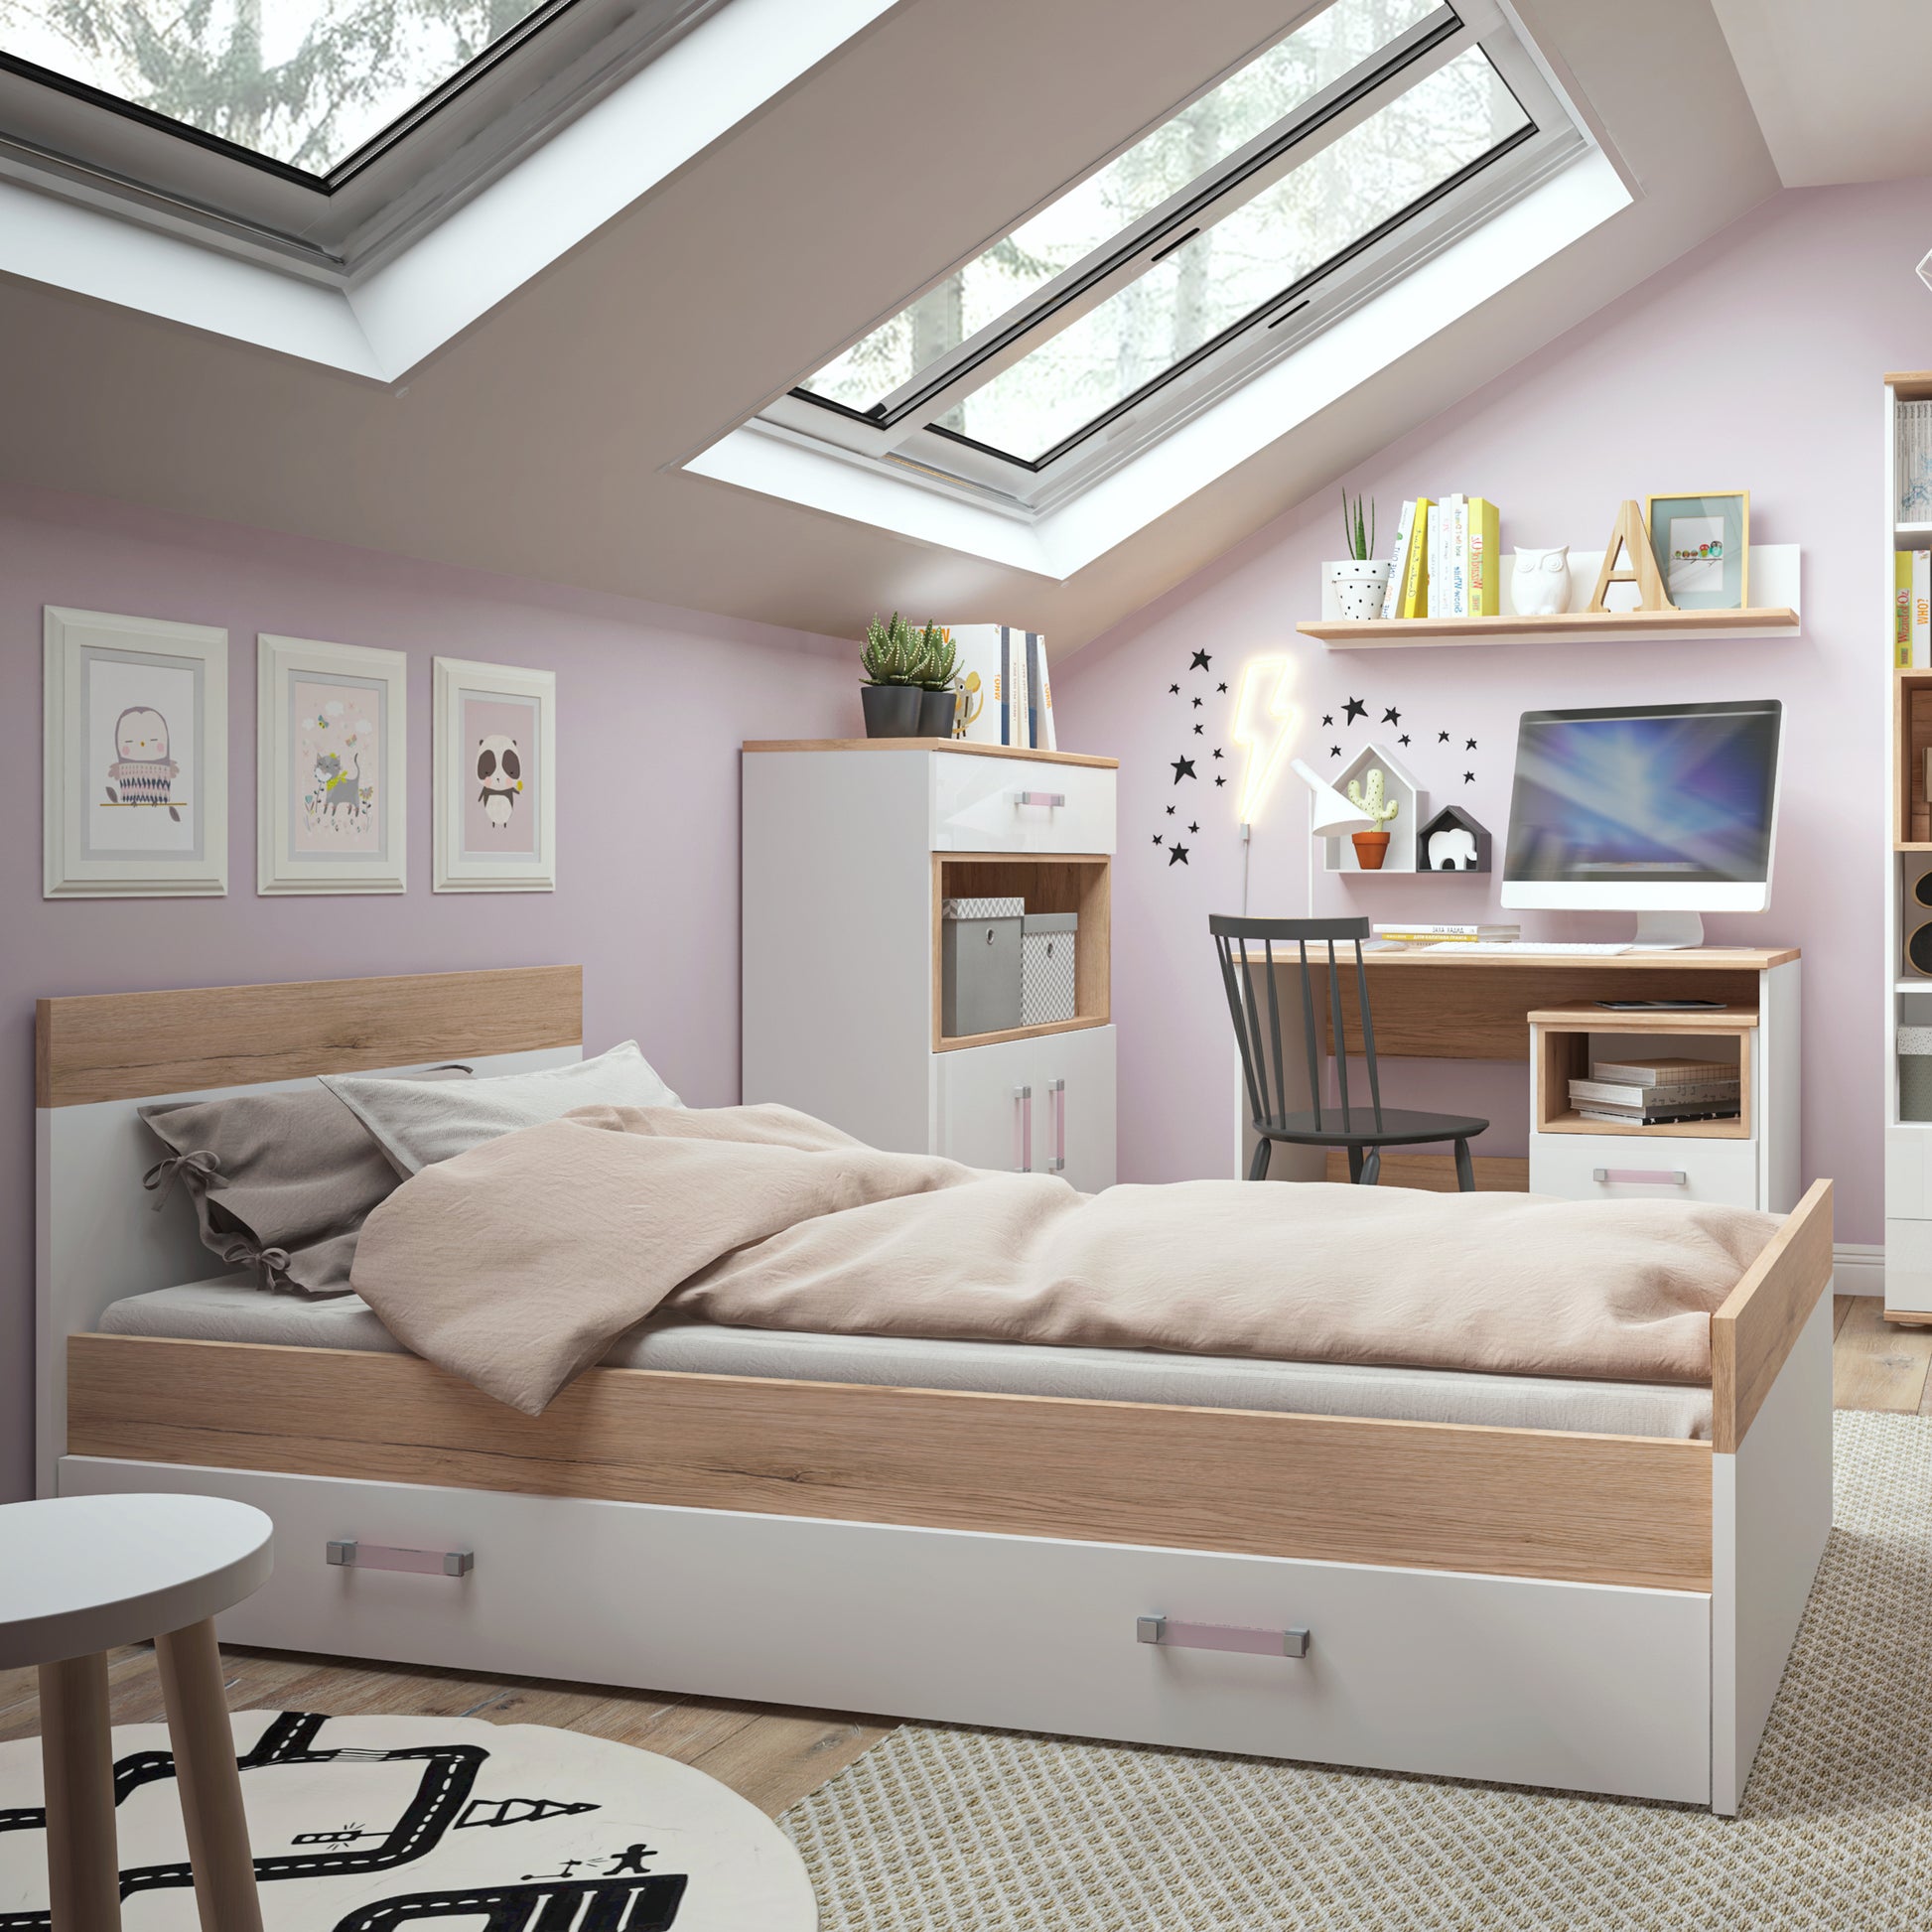 4Kids  Single Bed with under Drawer in Light Oak and white High Gloss (lilac handles)